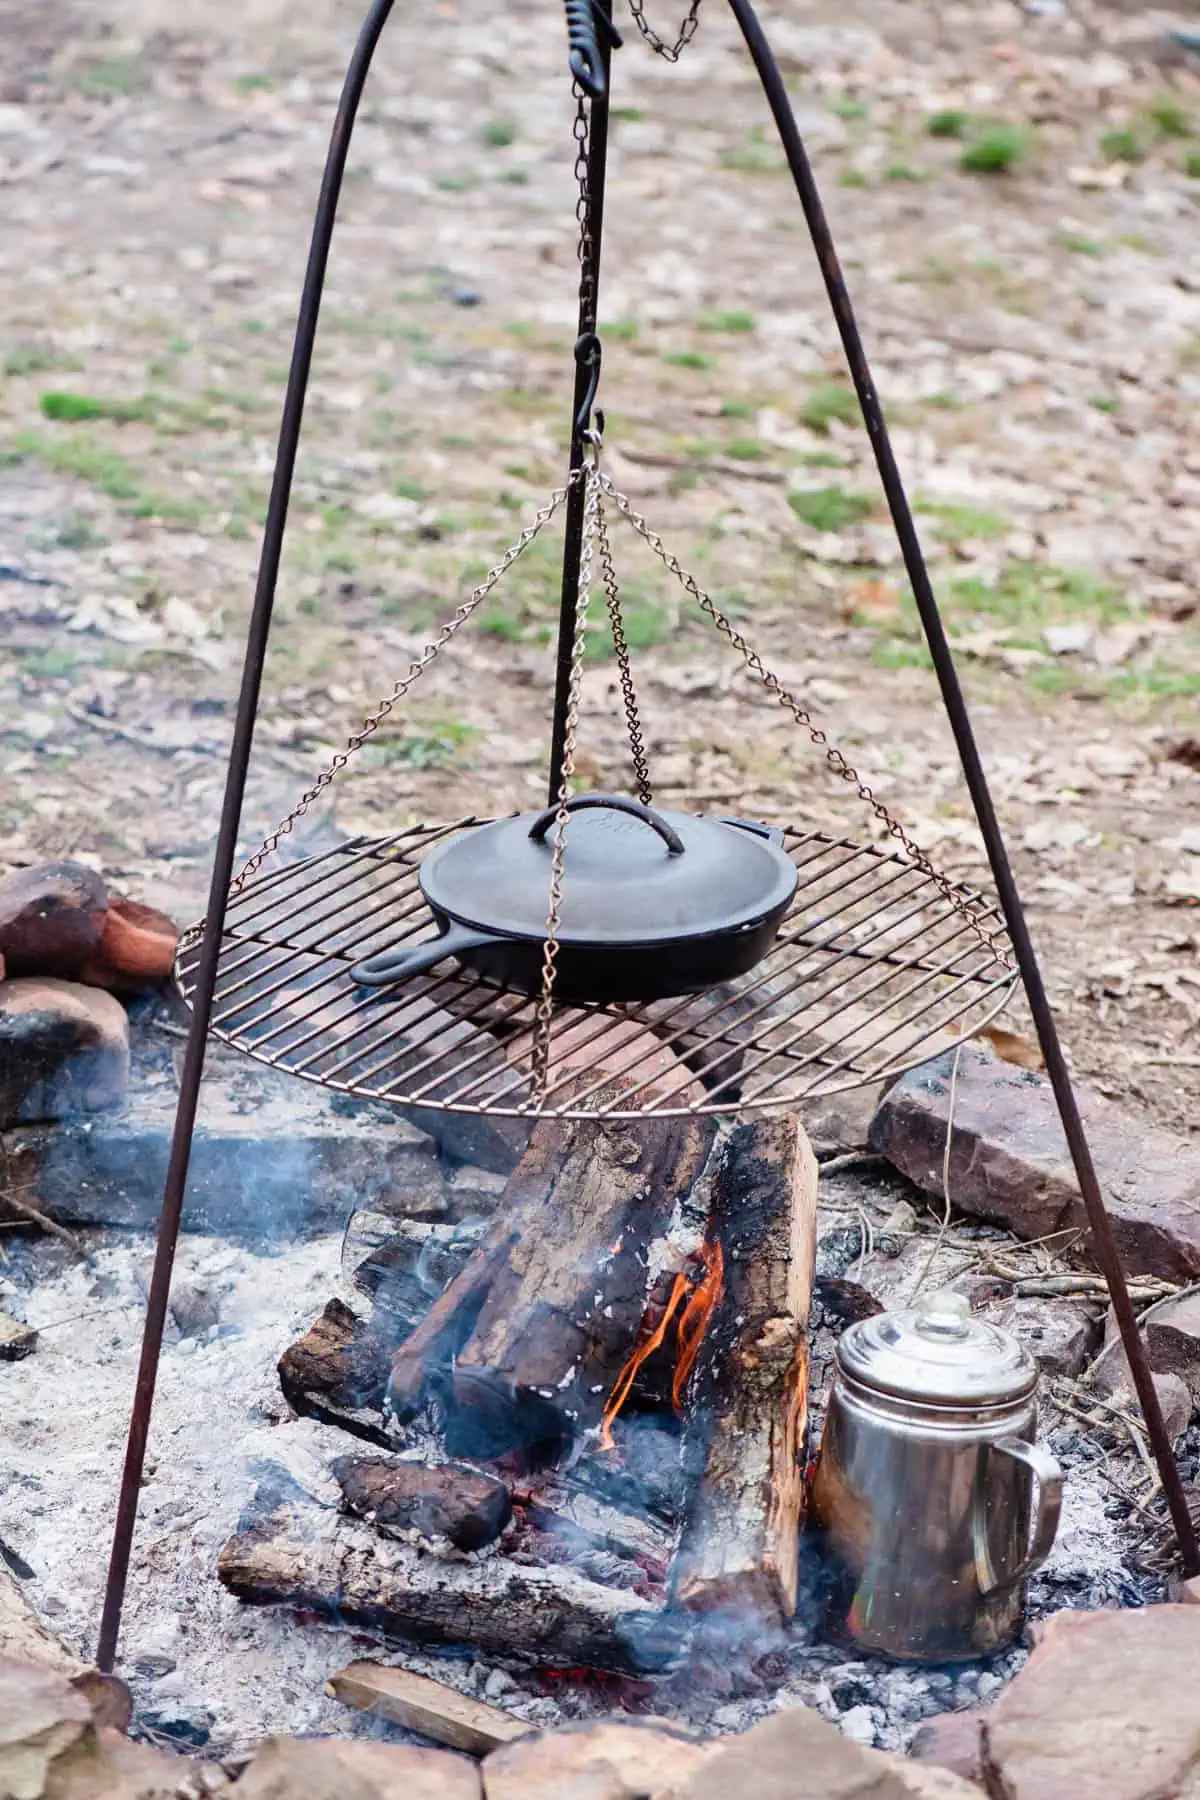 large black cast iron skillet on top of a campfire grill over a hot campfire